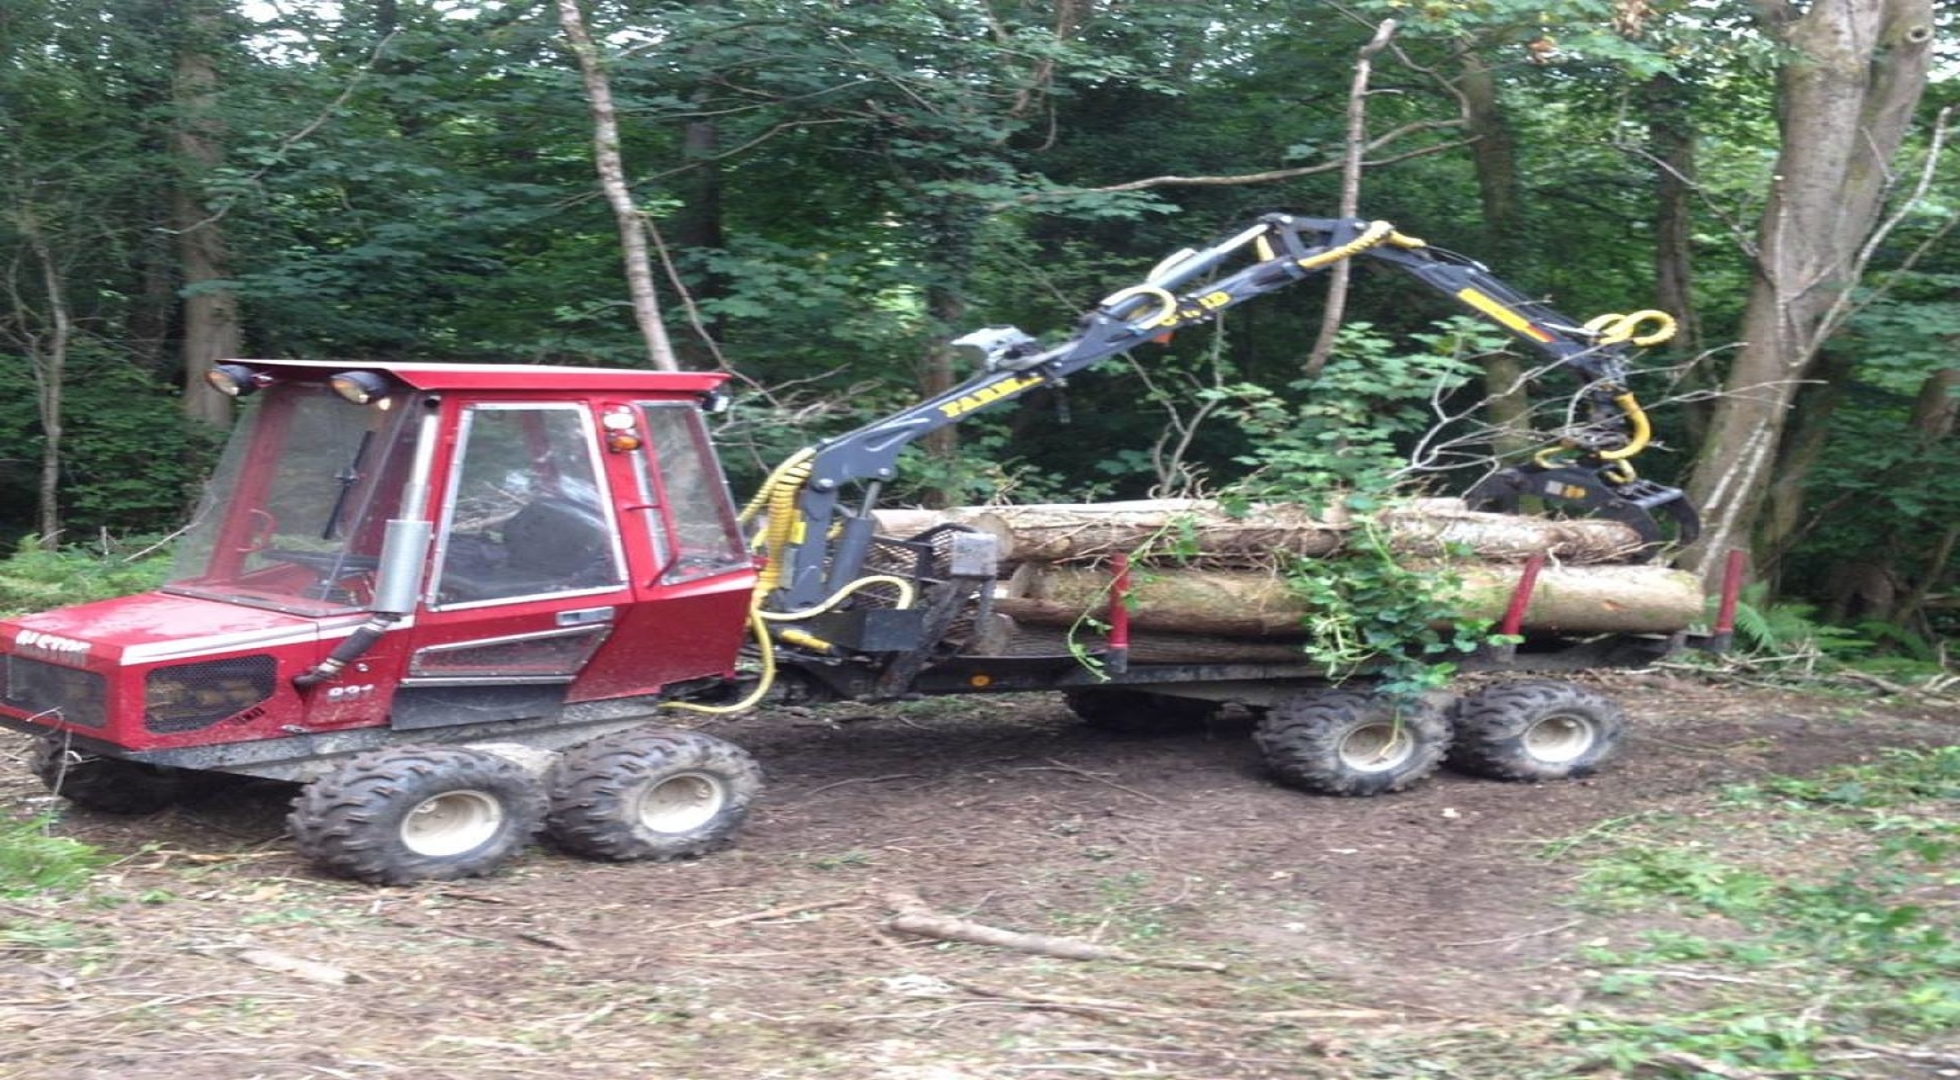 Tree Services in Monmouthshire and Gloucestershire